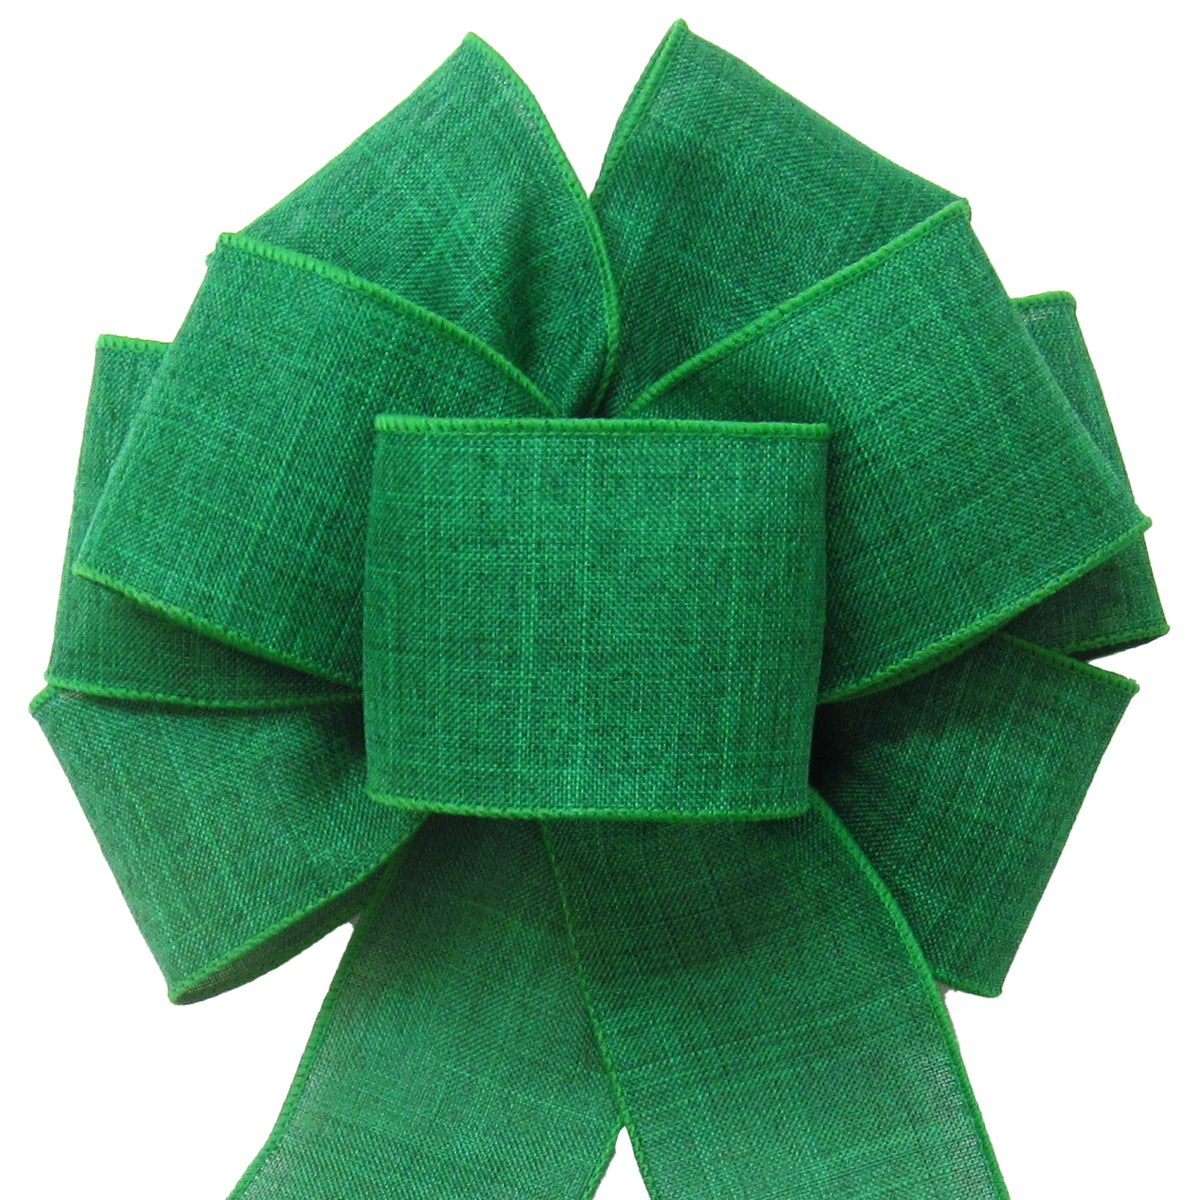 Natural Bows - Linen Bows - Wired Moss Green Linen Bow 6 Inch